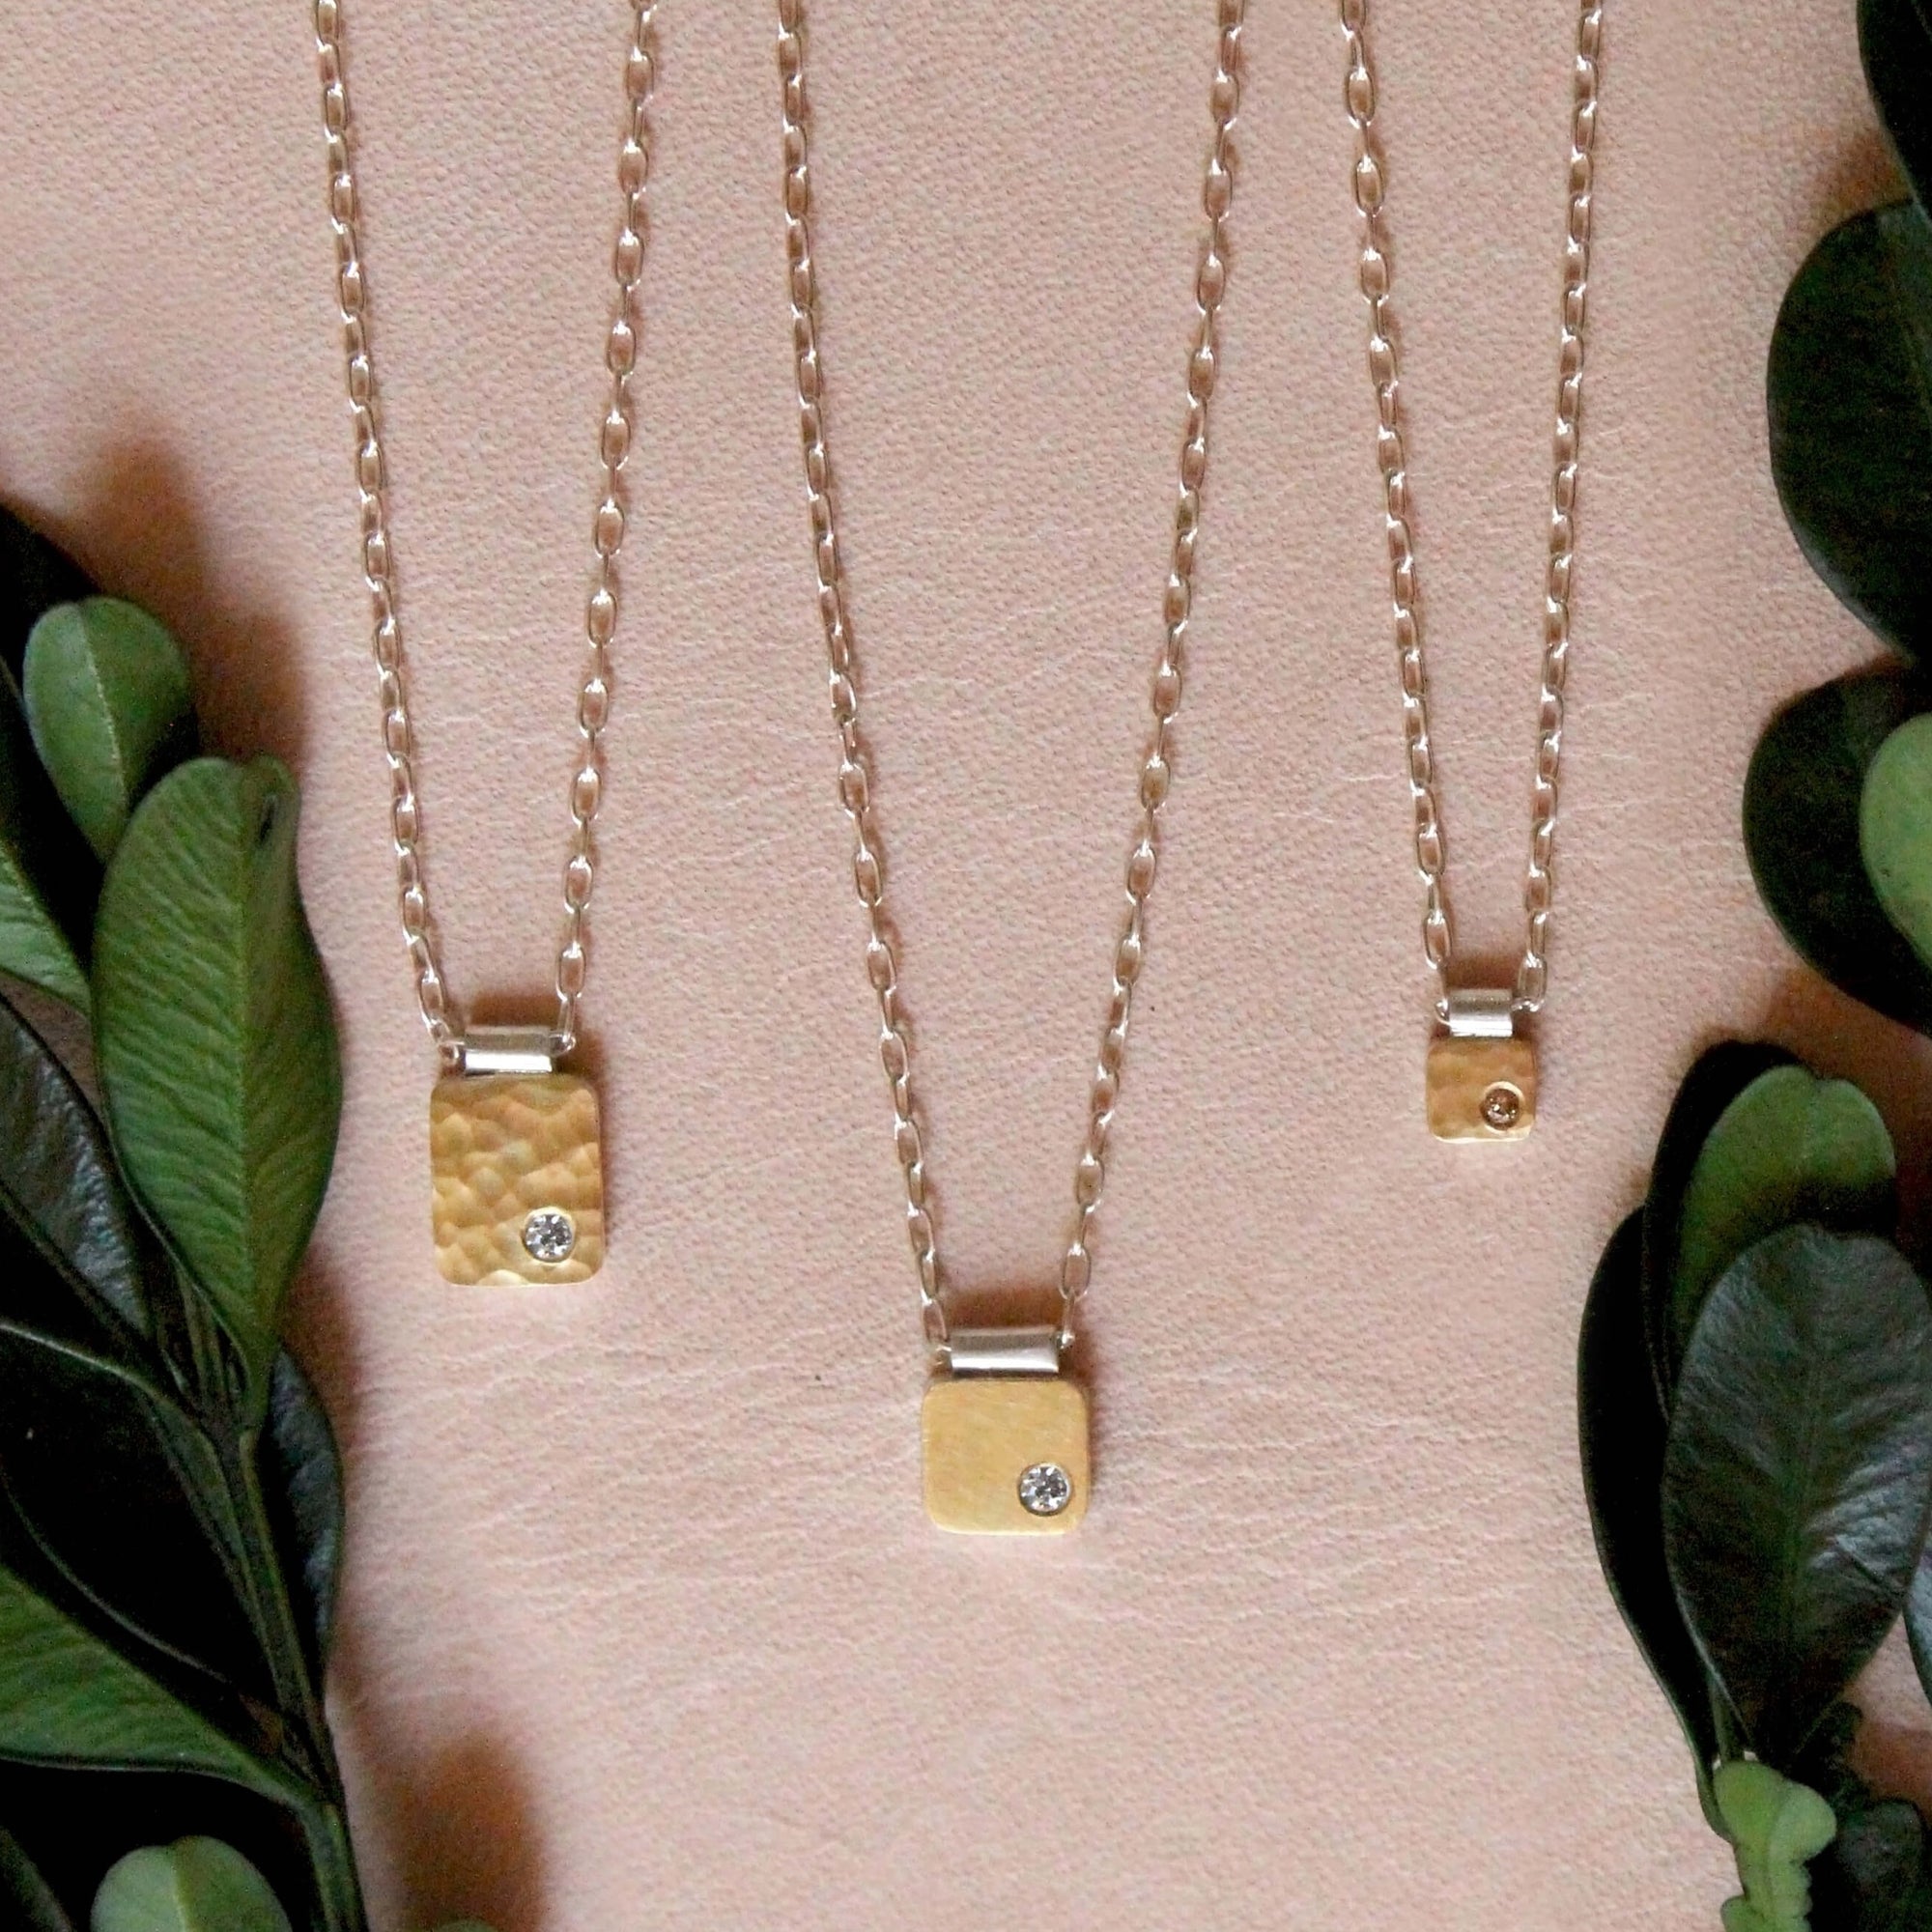 Yellow gold and diamond cell pendants from EC Design Jewelry in Minneapolis, MN. Handmade with recycled metal and conflict-free stones.